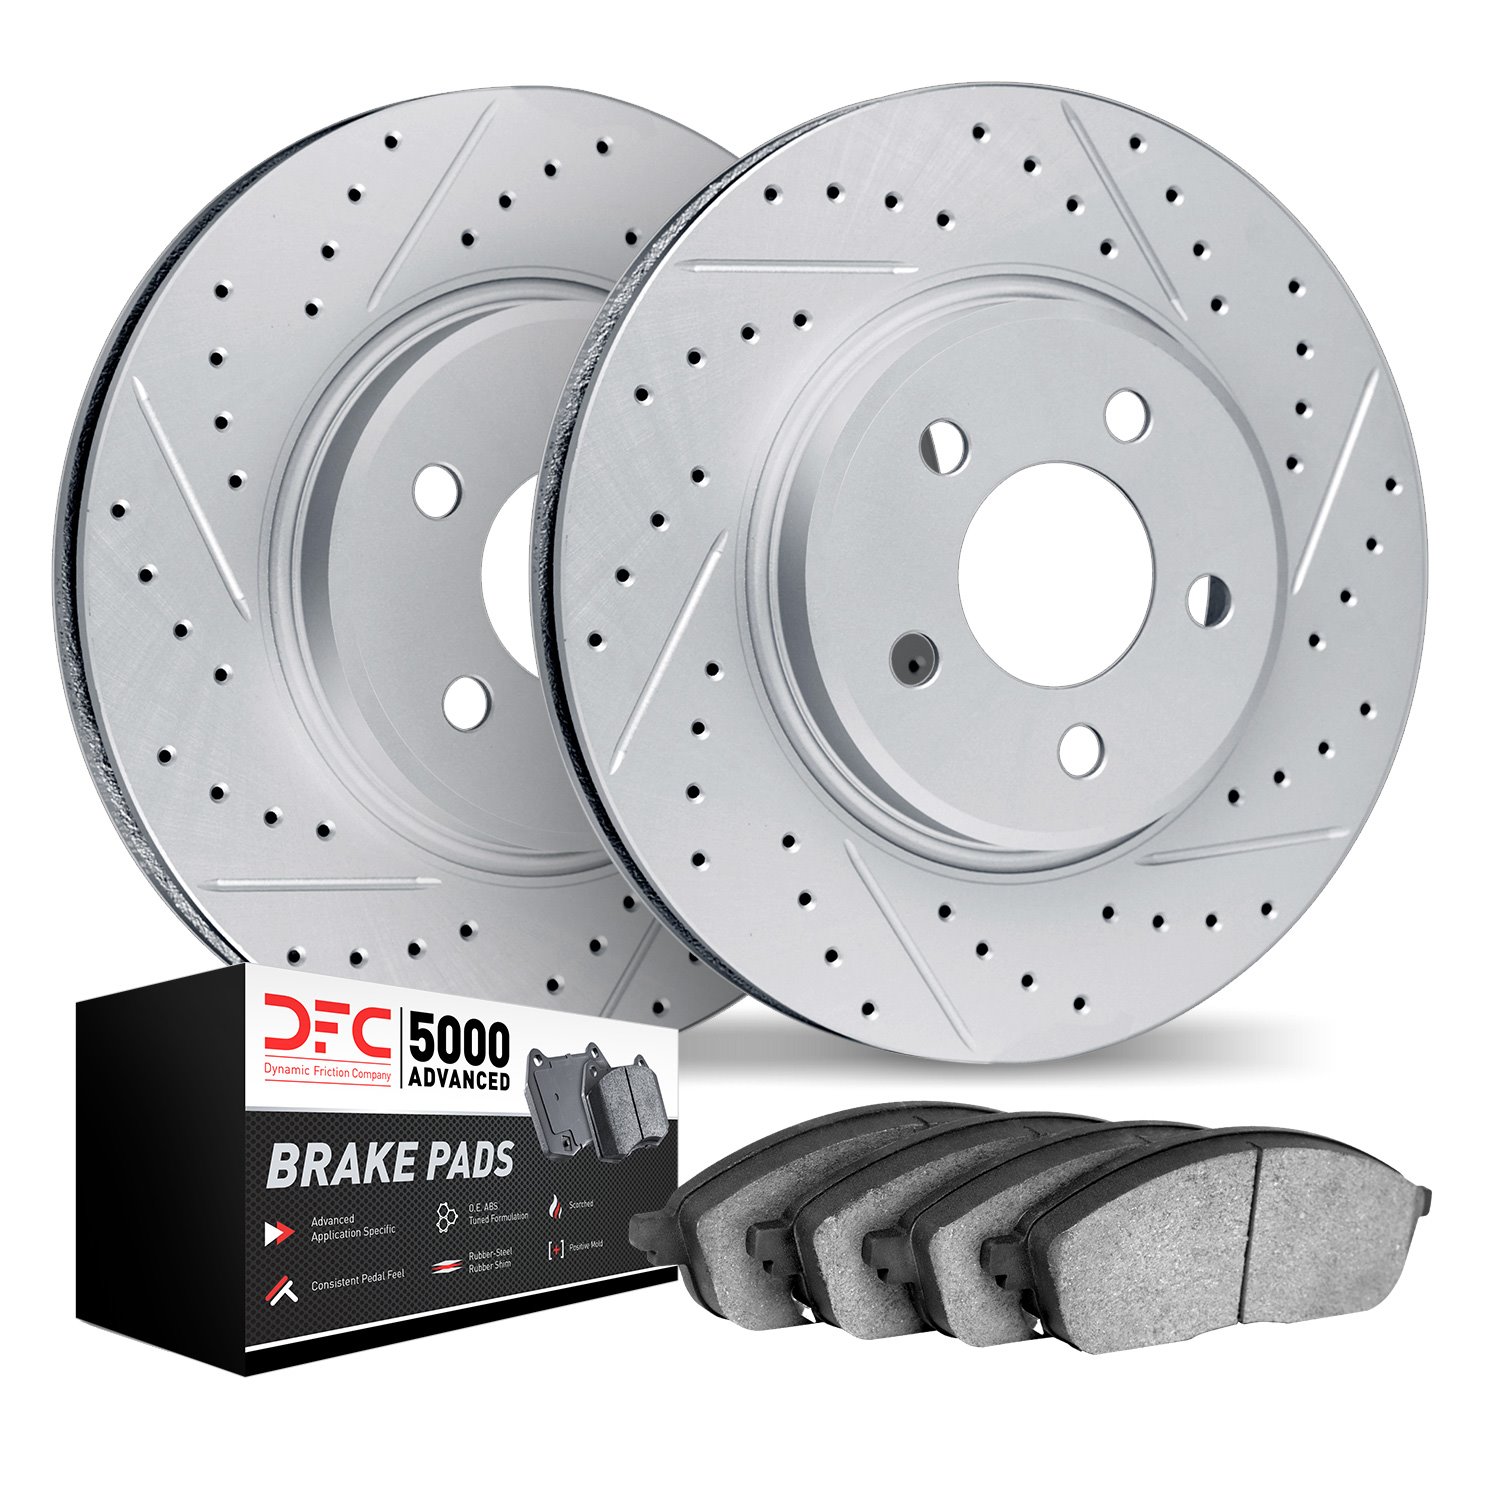 2502-02012 Geoperformance Drilled/Slotted Rotors w/5000 Advanced Brake Pads Kit, 1984-1989 Porsche, Position: Rear